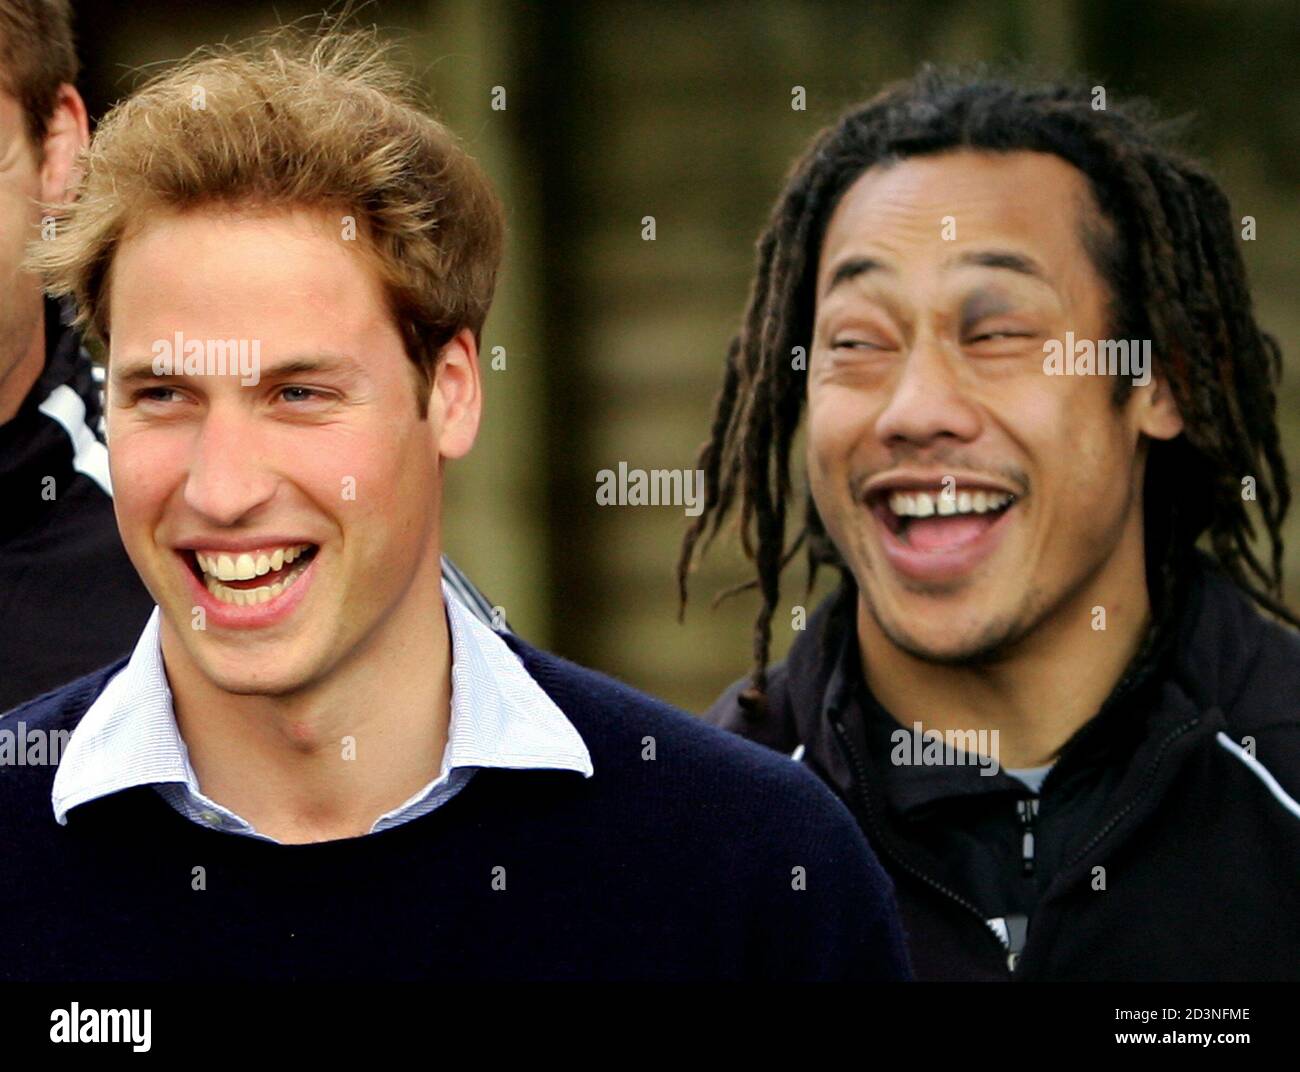 Britain's Prince William (L) laughs with captain of the All Blacks Tana Umaga at a public training session in Auckland July 4, 2005. [Prince William, who graduated recently from Scotland's St Andrews University, met the All Black team two days after they defeated the British and Irish Lions in Wellington and took an unbeatable 2-0 lead in the best-of-three test series.] Prince William is also performing official duties during his ten-day tour of New Zealand, his first official tour of a foreign country by himself. Foto de stock